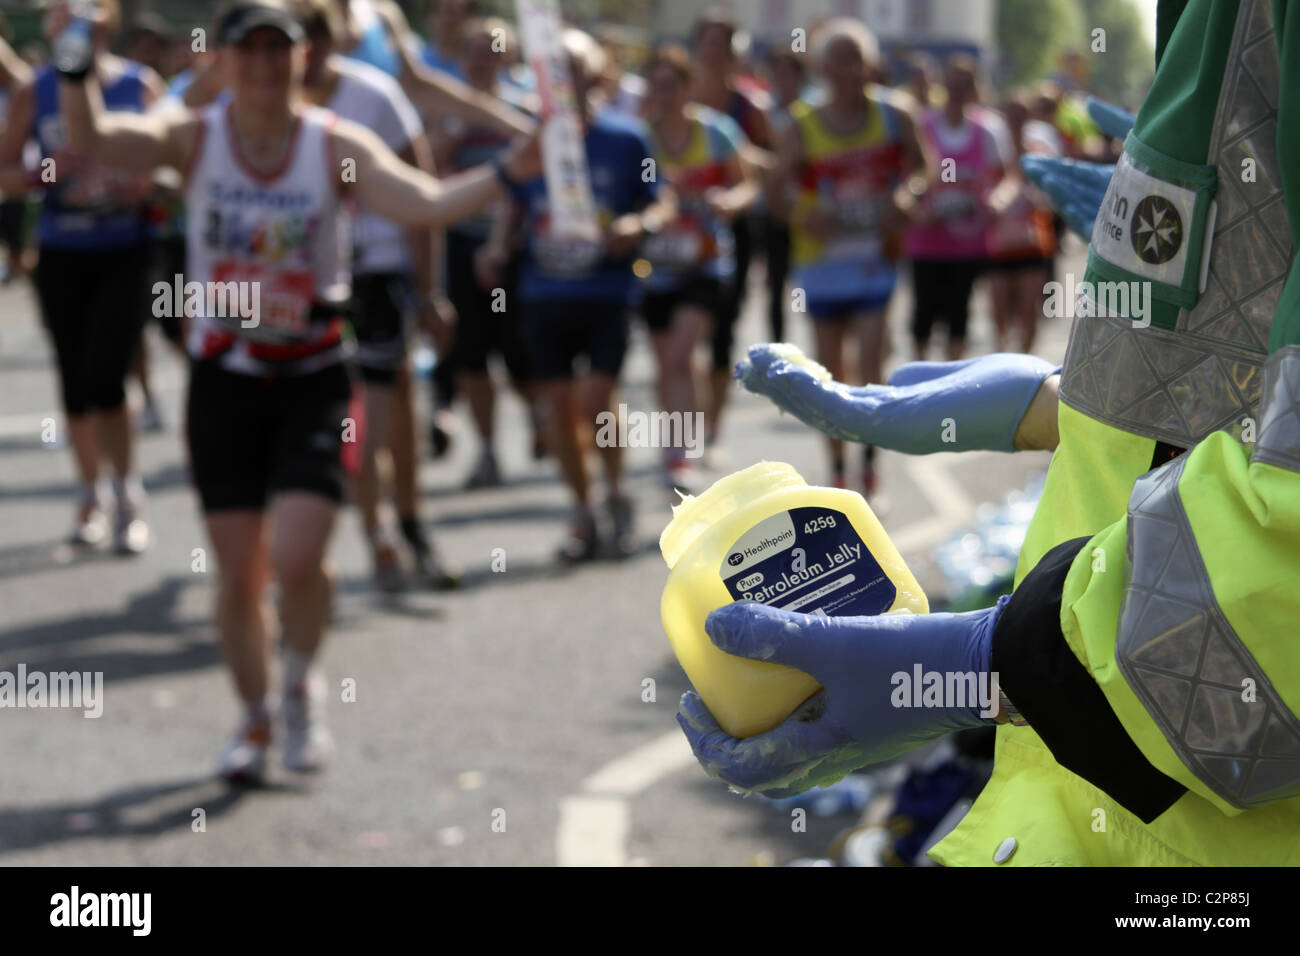 St. John's Ambulance volunteer offers petroleum jelly to runners on route of London Marathon Stock Photo